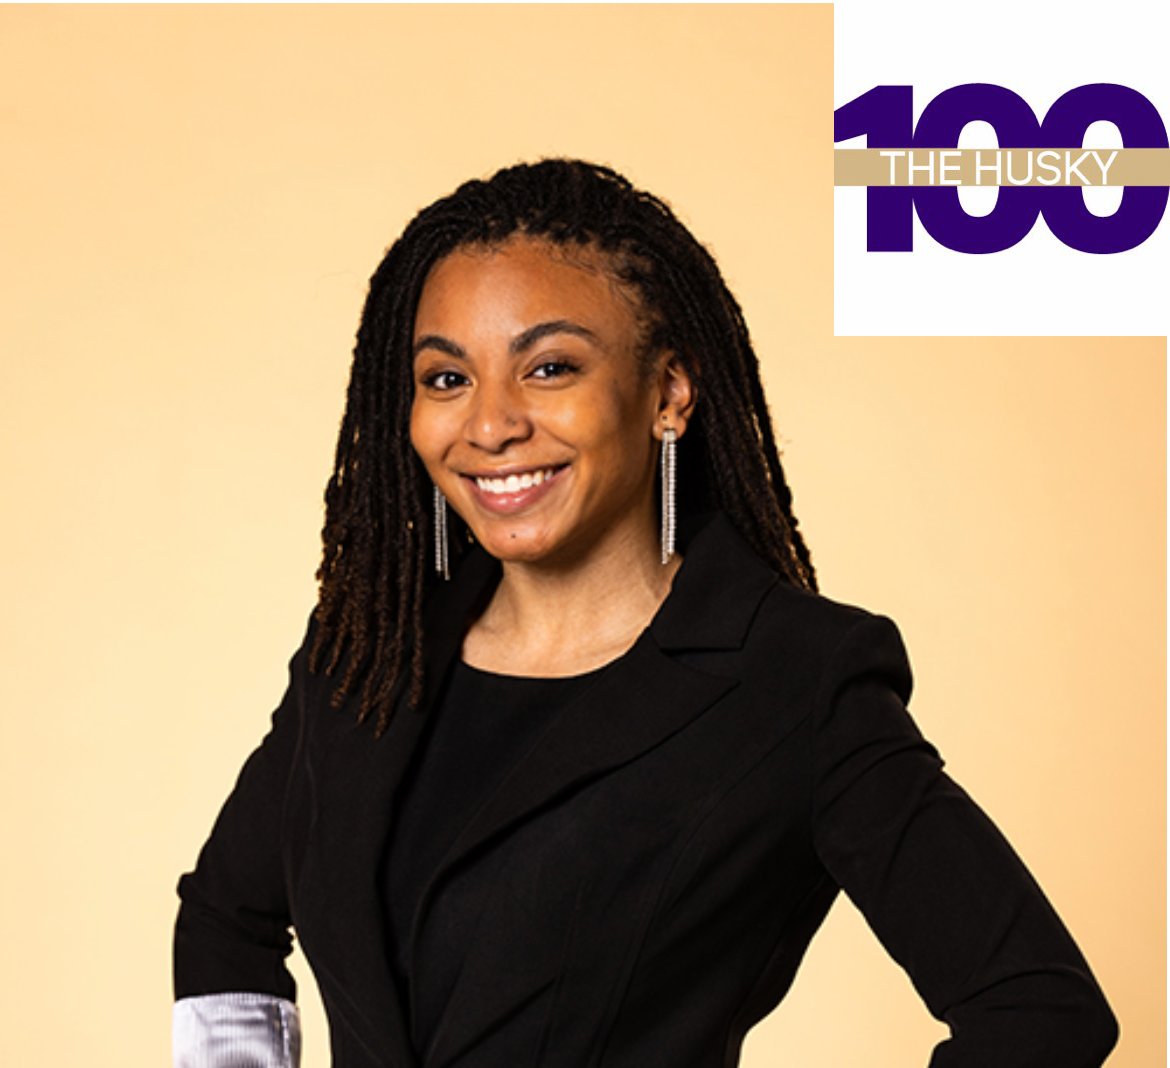 Congrats to all of this year's @UW #Husky100 awardees, including our very own @UWMolES PhD graduate student Olivia Dotson (@oliviapagedots, co-advised with @kellystevenslab)! Fantastic!